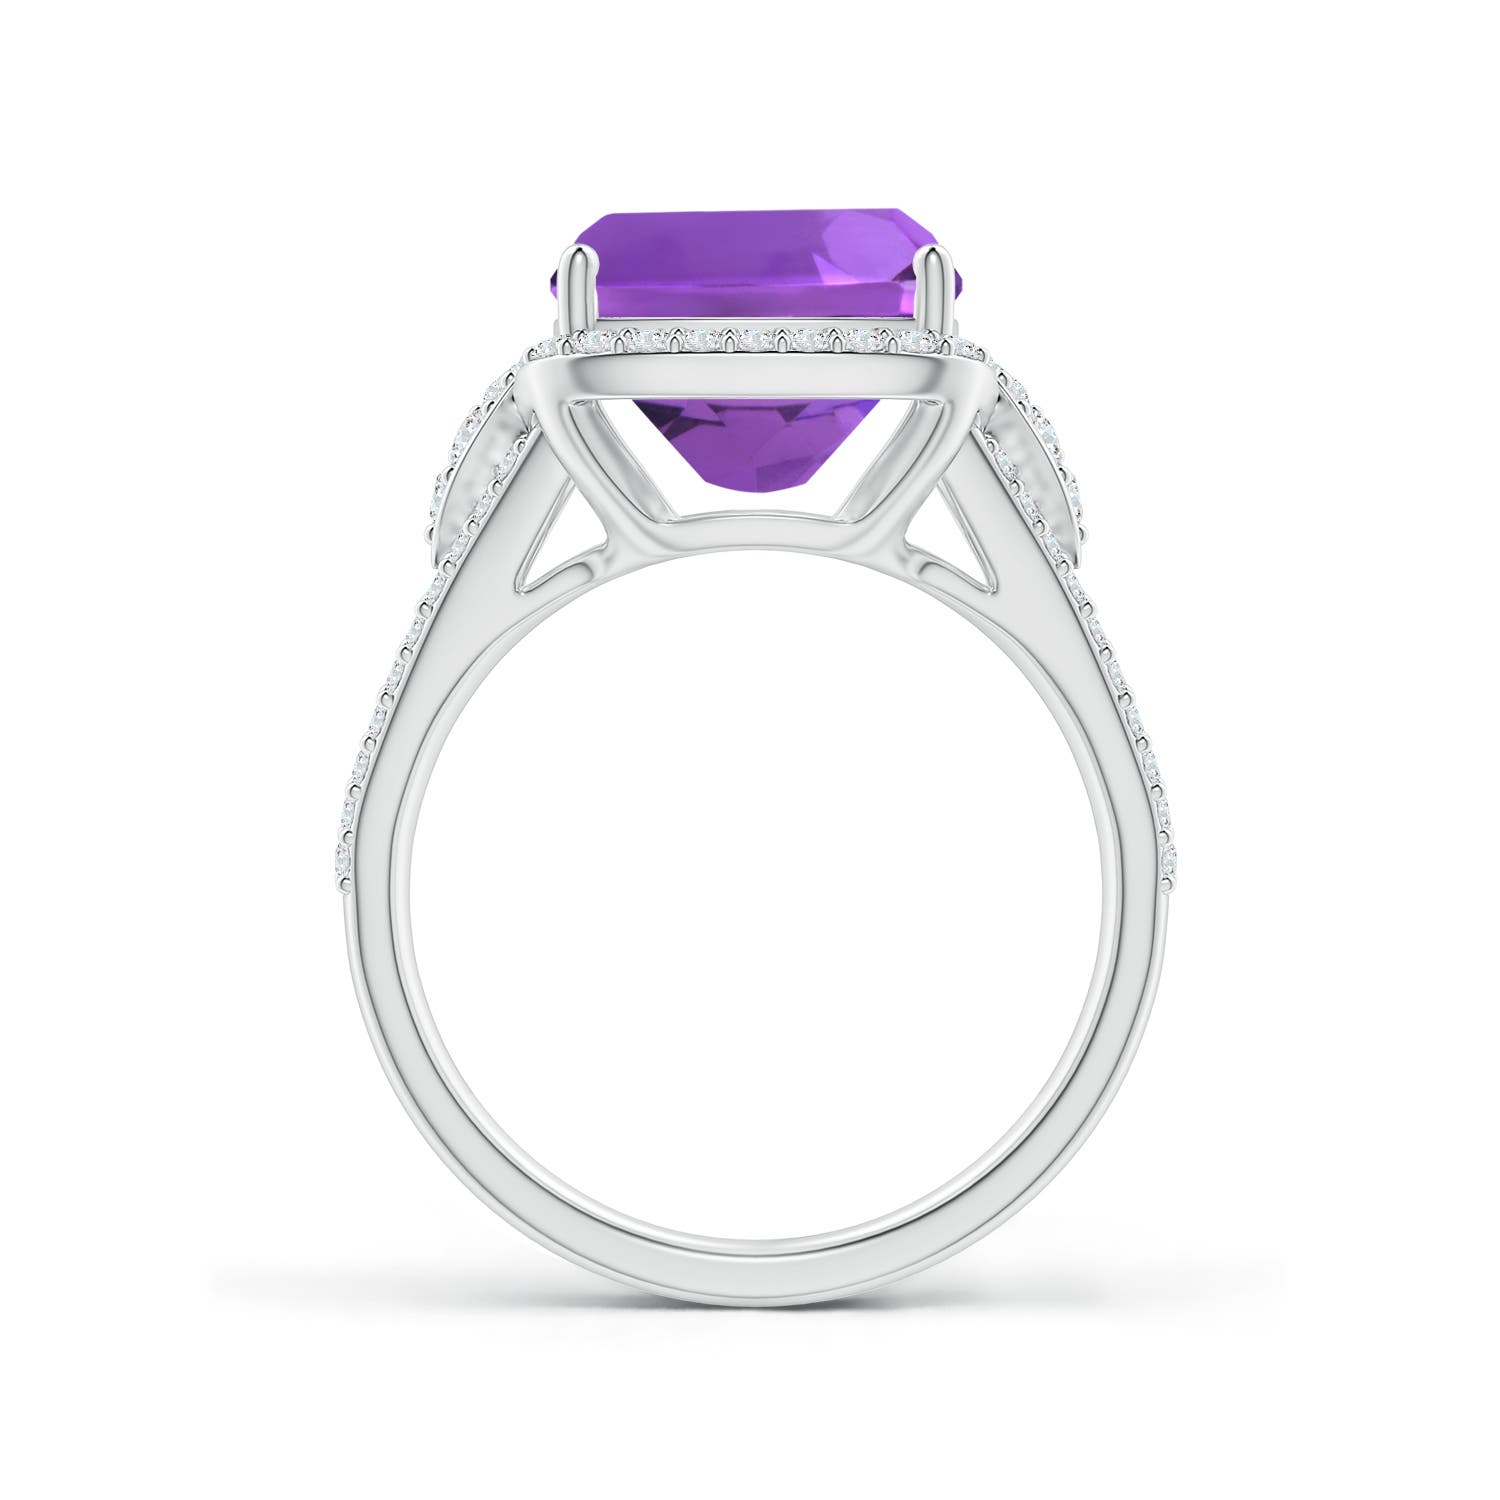 AAA - Amethyst / 5.06 CT / 14 KT White Gold